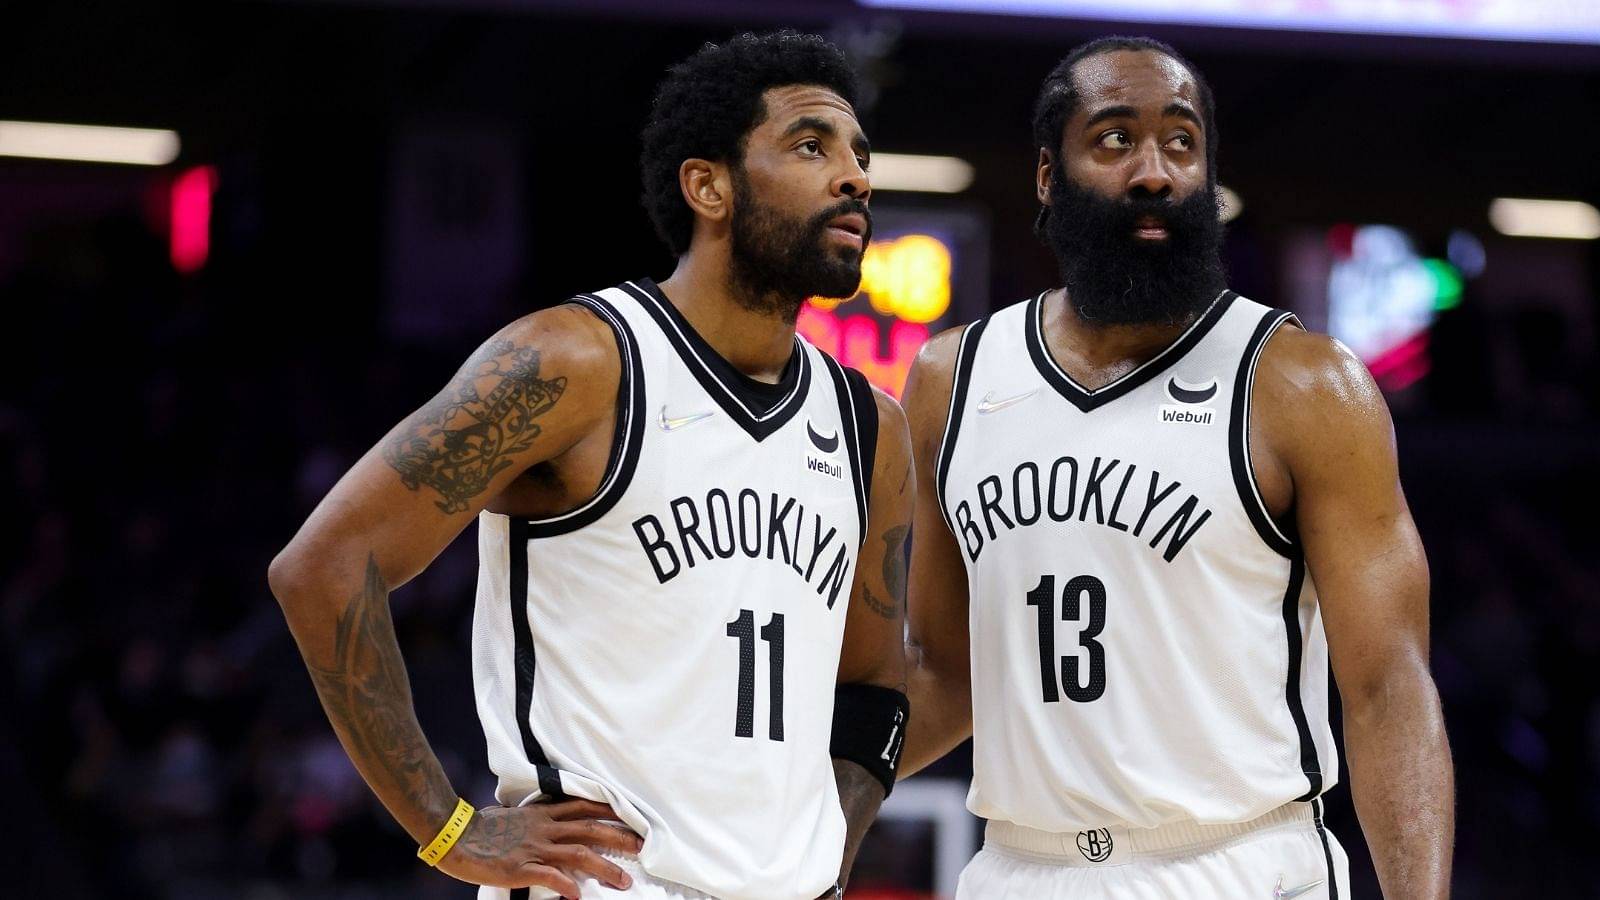 “Kyrie Irving has to be the least self aware professional athlete of all time”: NBA Twitter grills point guard for failing to avoid Nets’ 8th straight loss and commenting on James Harden’s situation